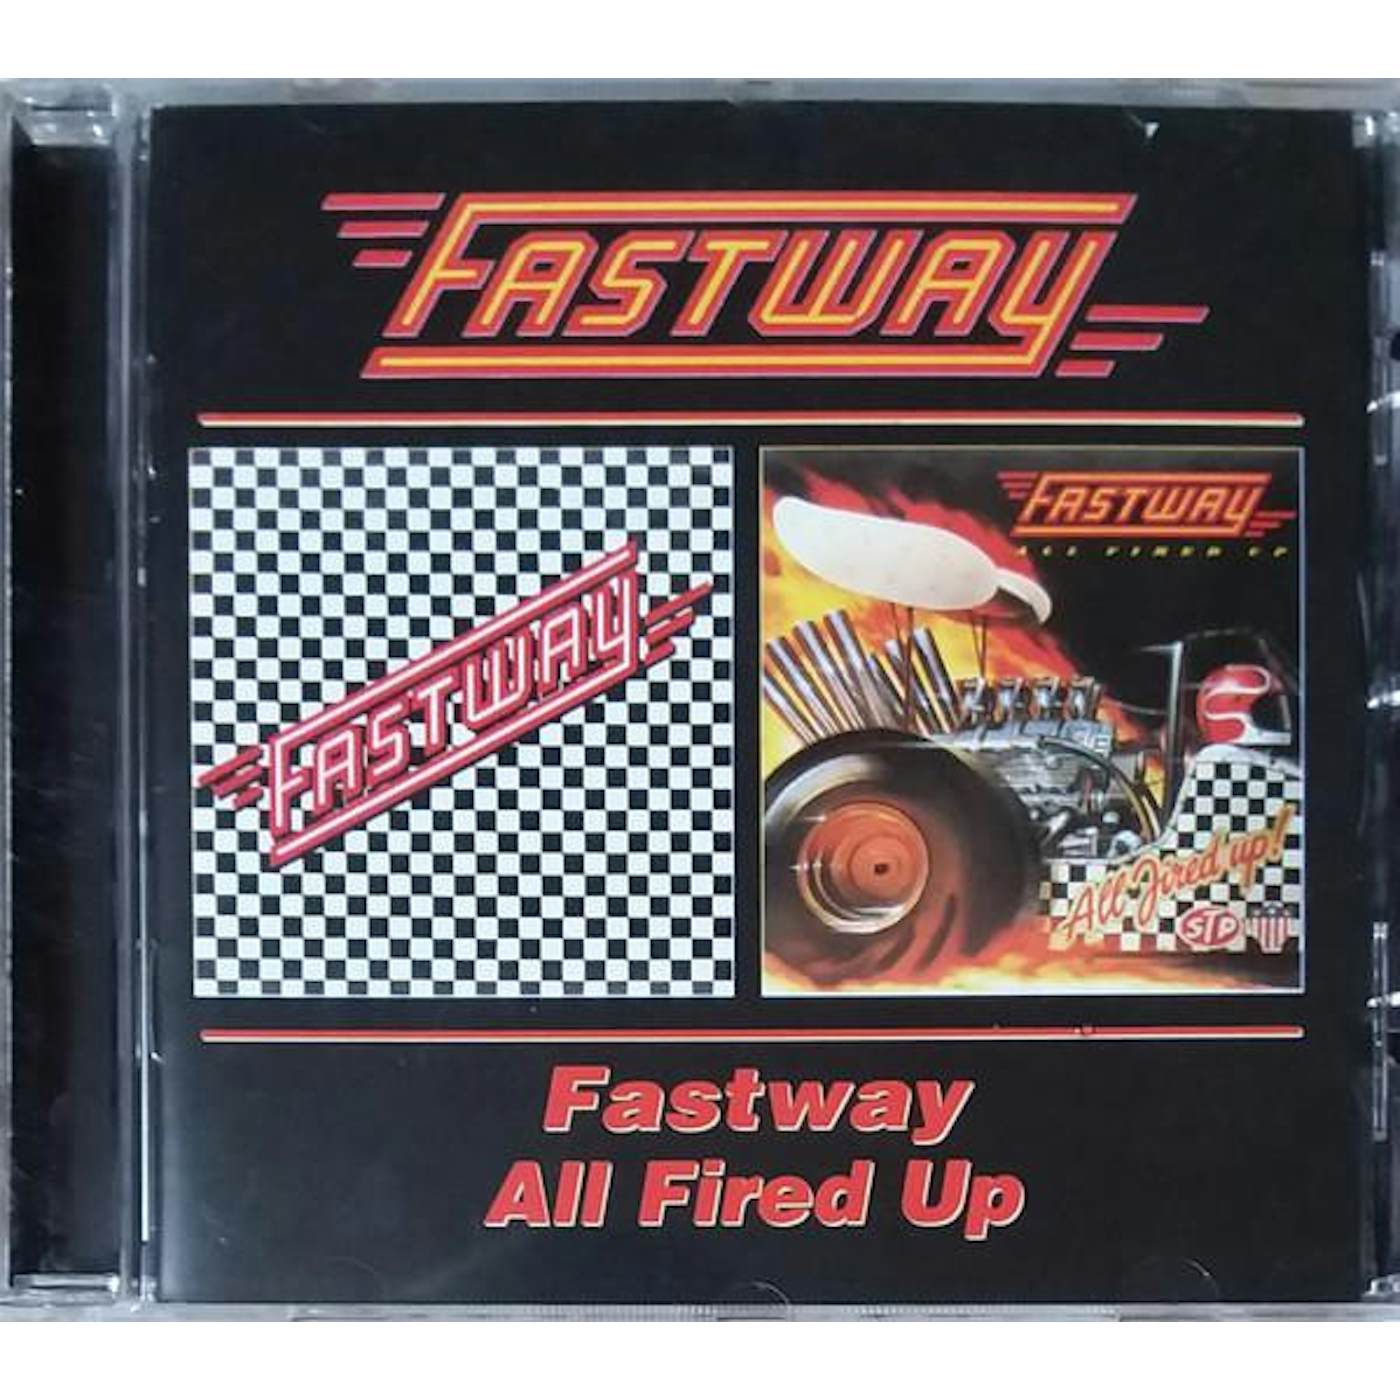 FASTWAY / ALL FIRED UP (REMASTERED) CD